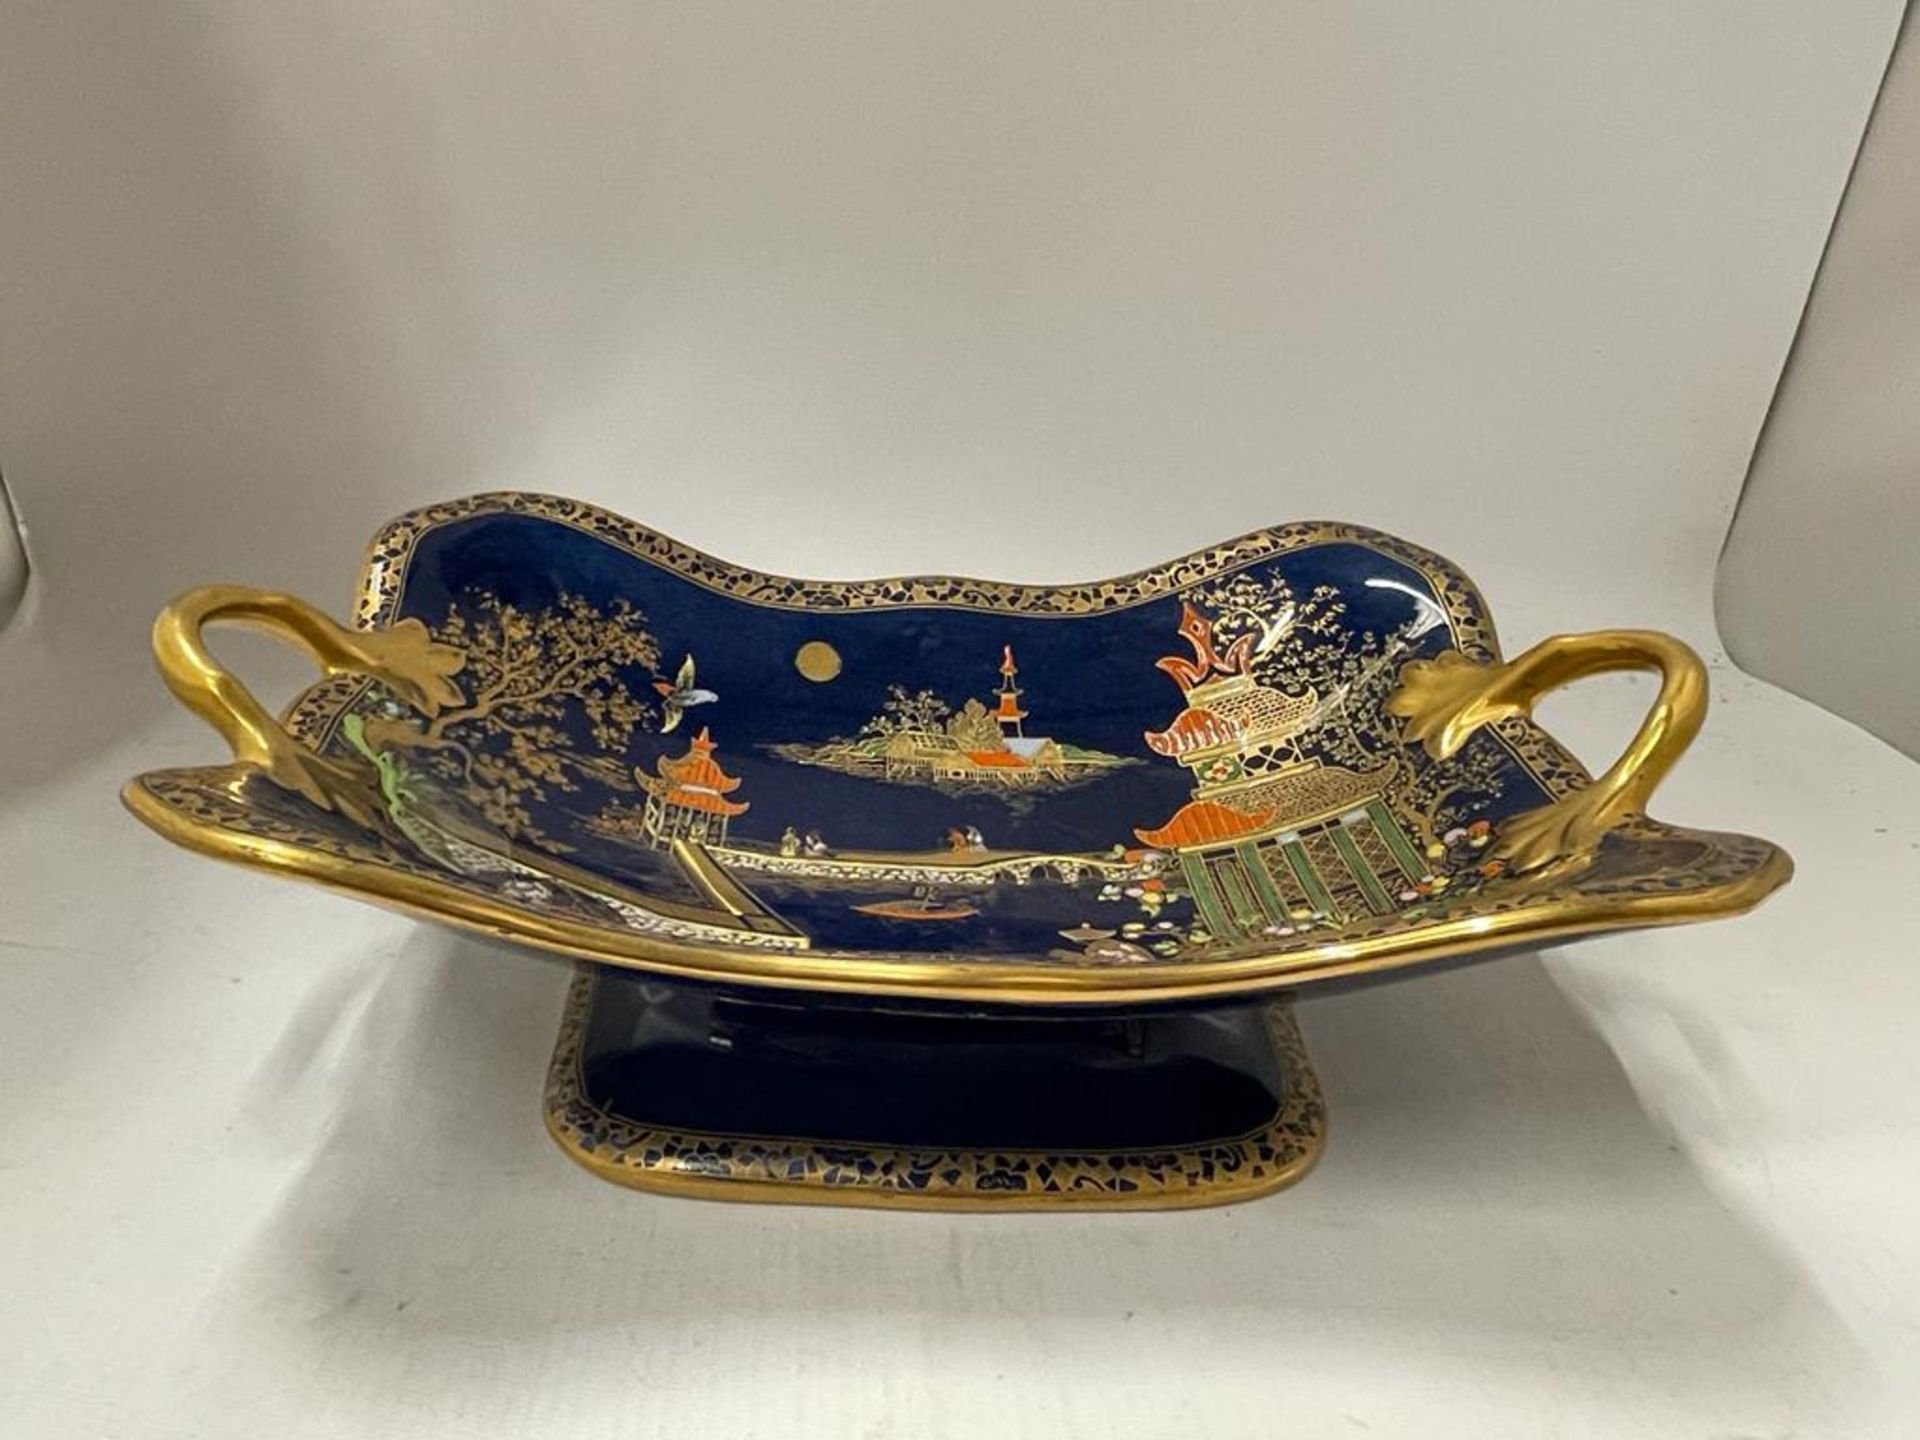 A CARLTON WARE TWIN HANDLED PEDESTAL BOWL DECORATED IN THE 'MIKADO' PATTERN WITH GILT DESIGN ON A - Image 2 of 6